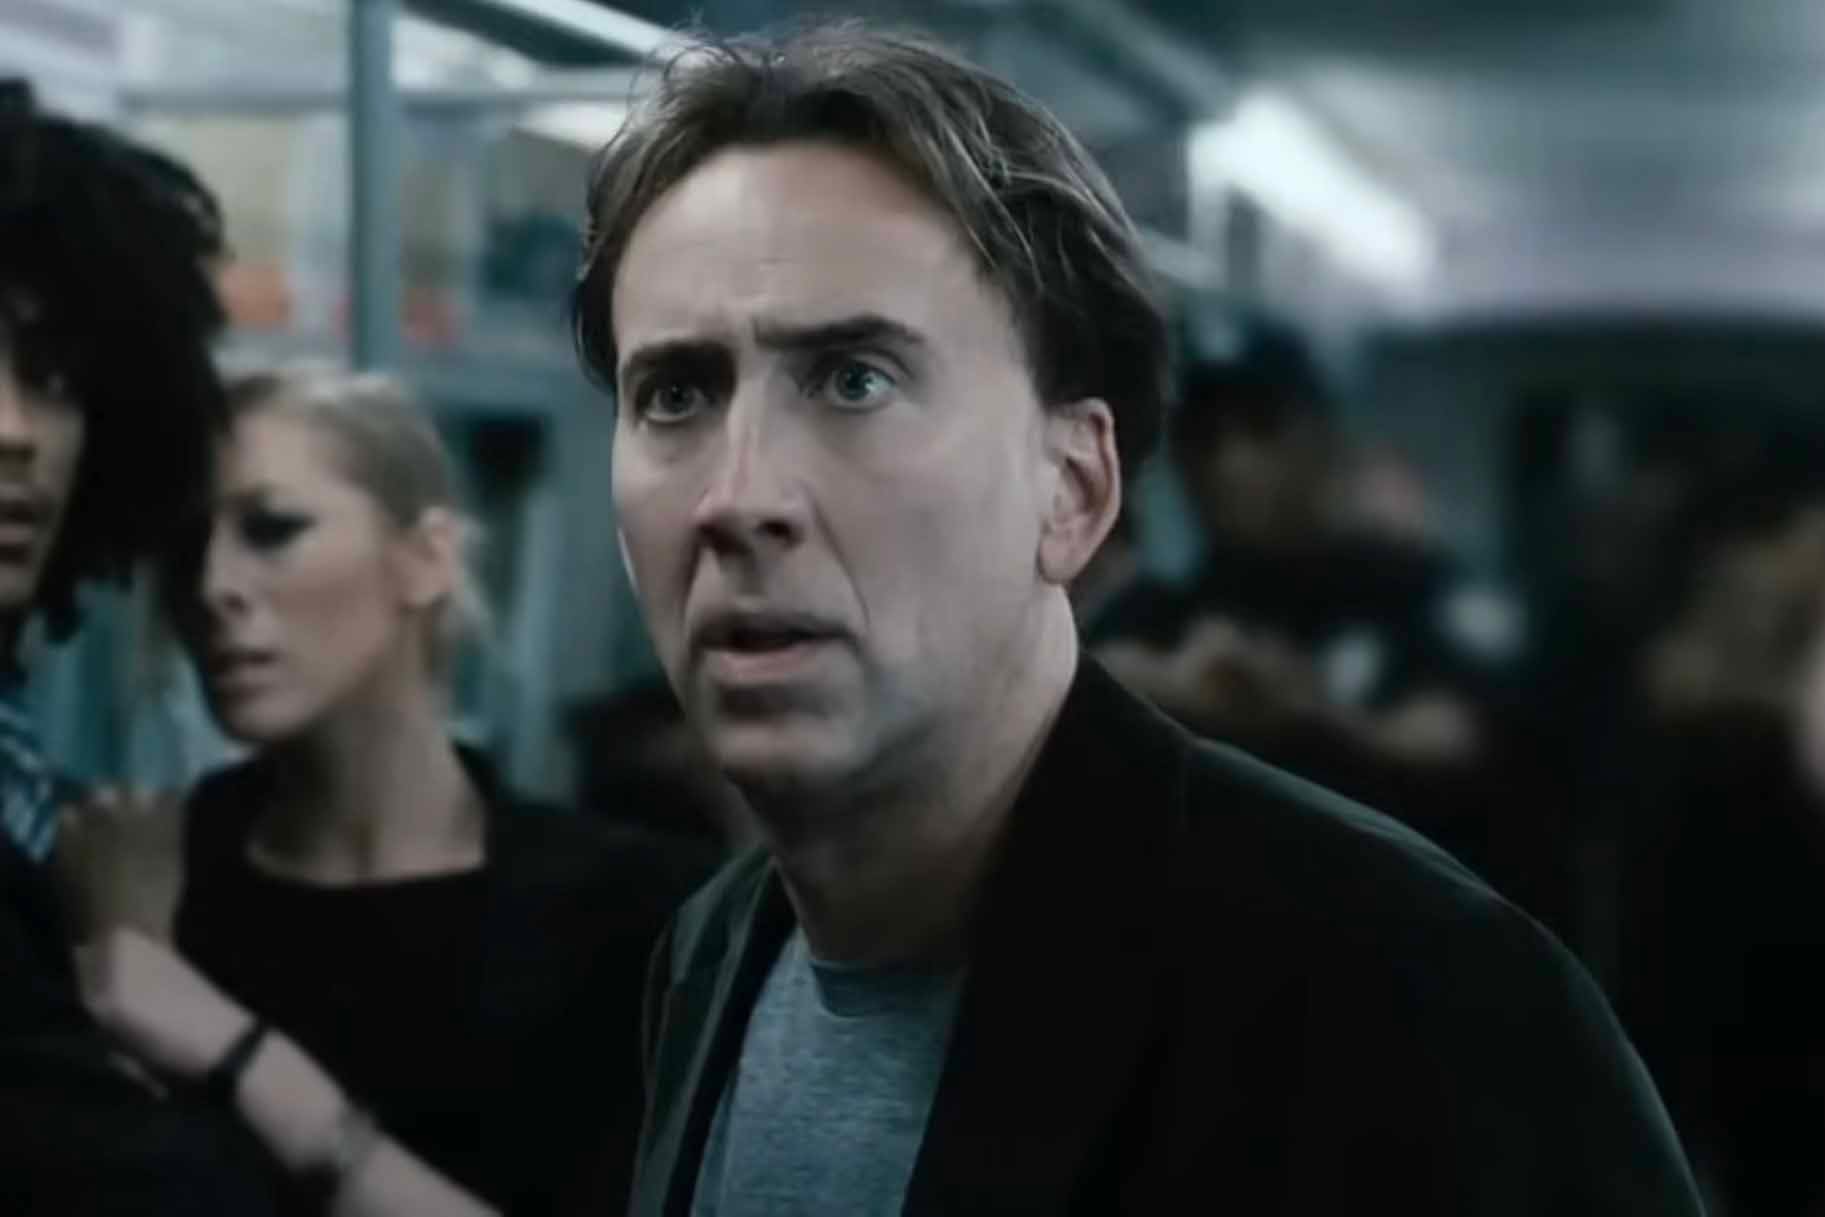 Knowing: Why 2009 Nicolas Cage Film Didn't "Glamorize" Disaster Scenes